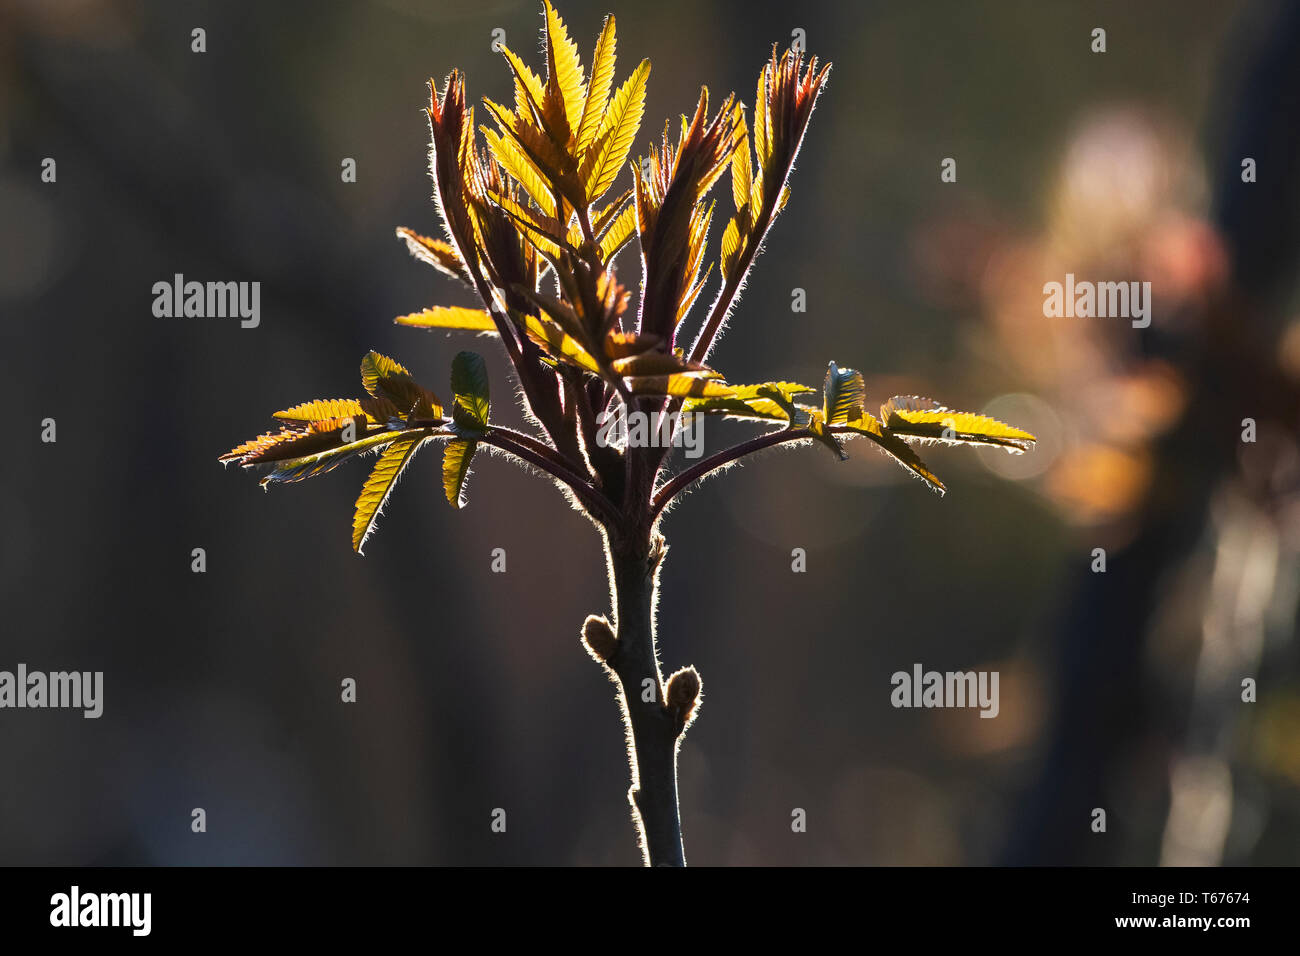 Back-lit staghorn sumac new spring gro wth Stock Photo